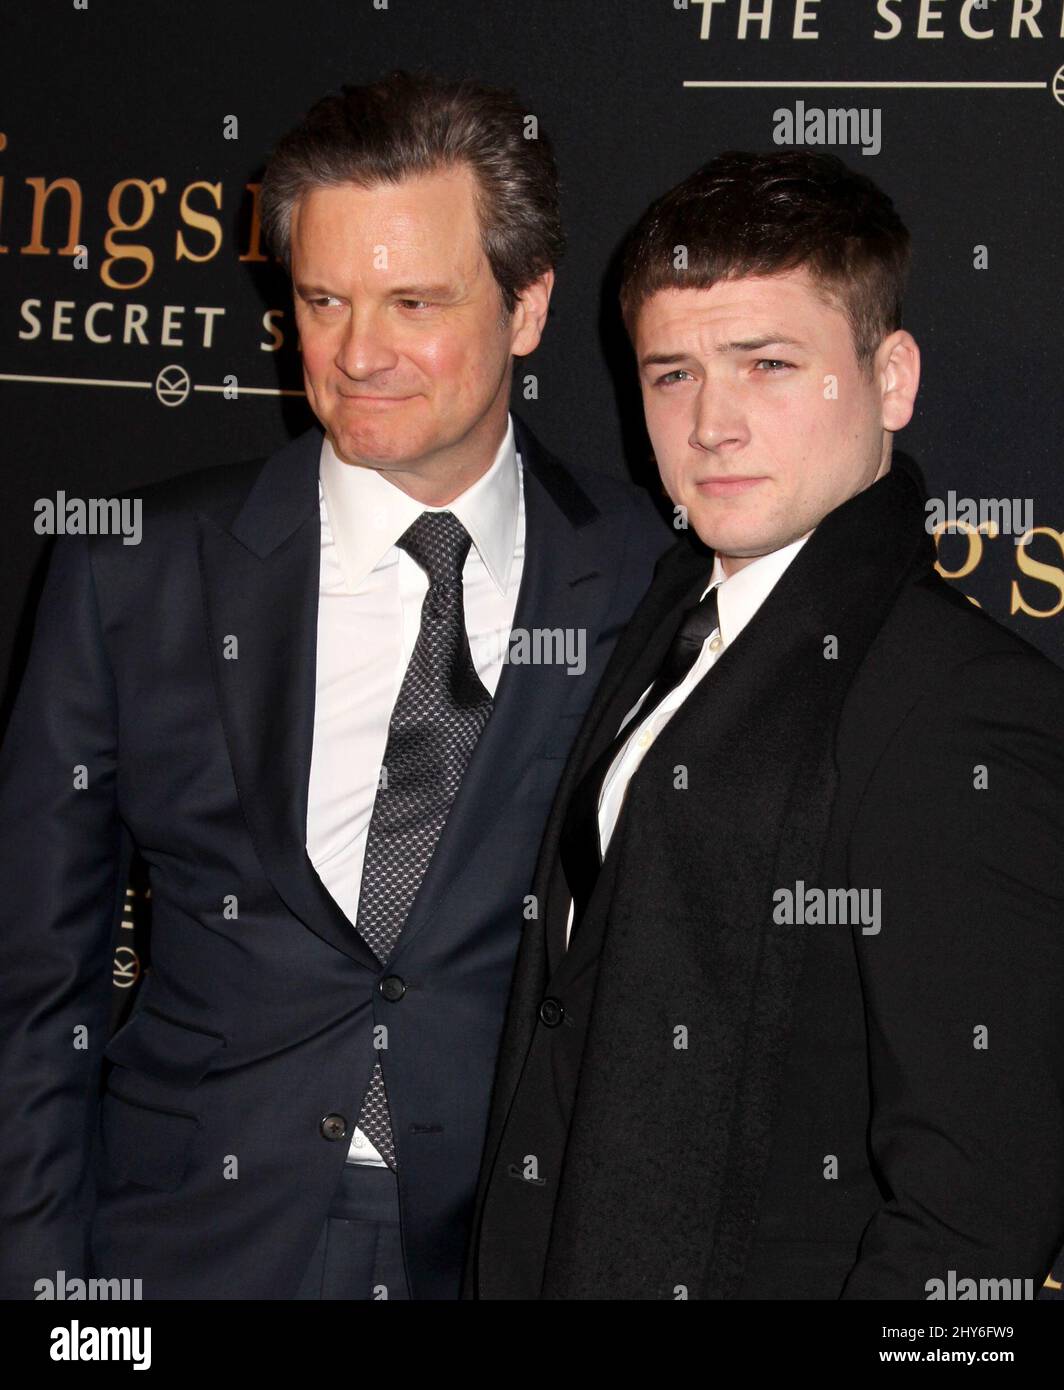 Colin Firth and Taron Egerton attending the "Kingsmen: The Secret Service" premiere at the SVA Theatre, New York Stock Photo